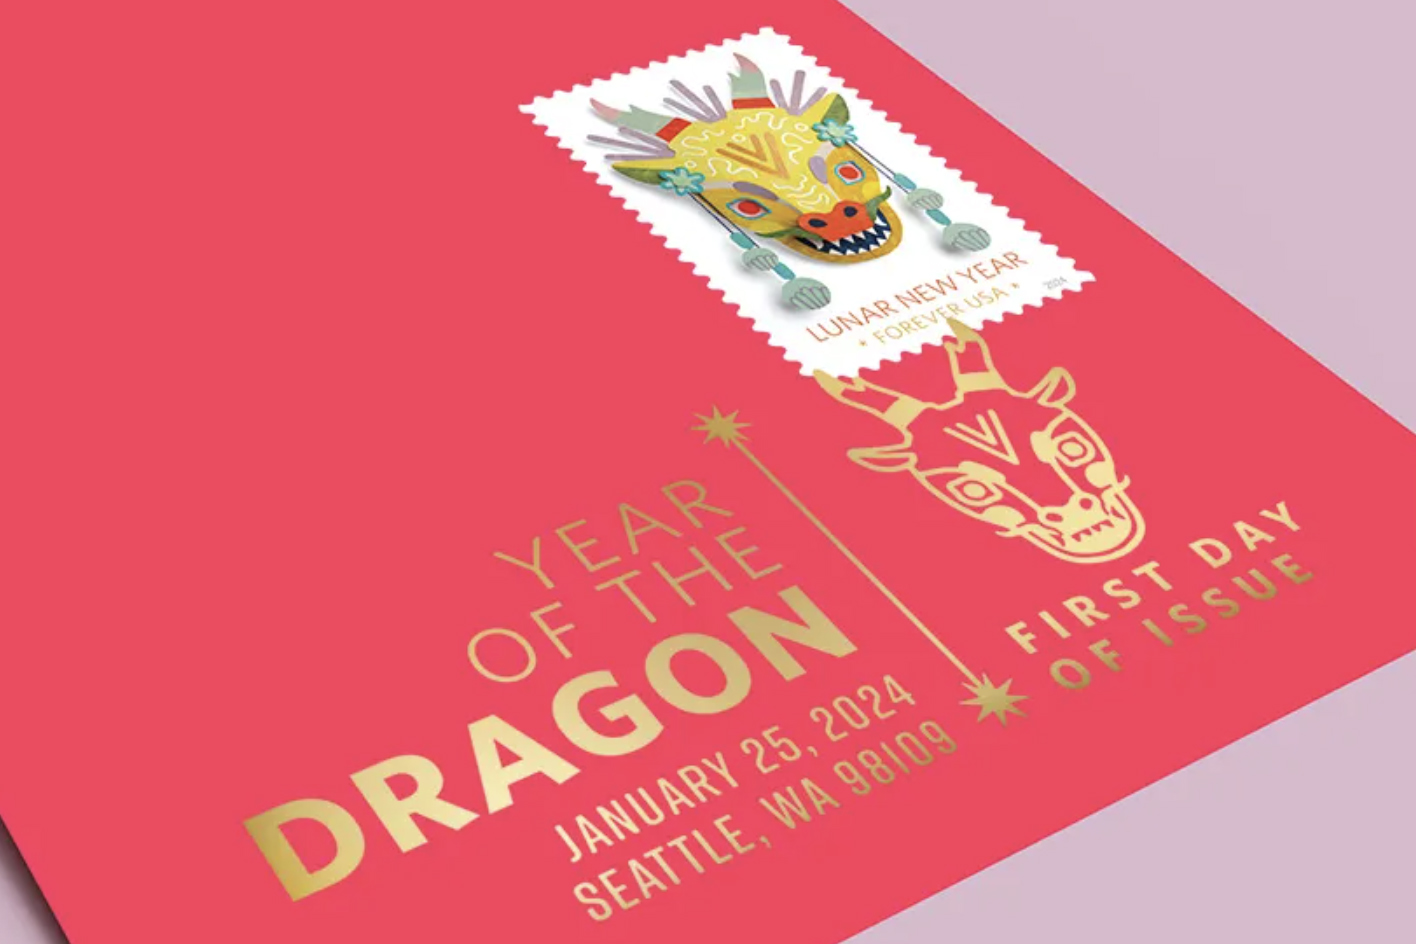 This is a commemorative stamp with a colorful dragon illustration celebrating the Lunar New Year on a red background.